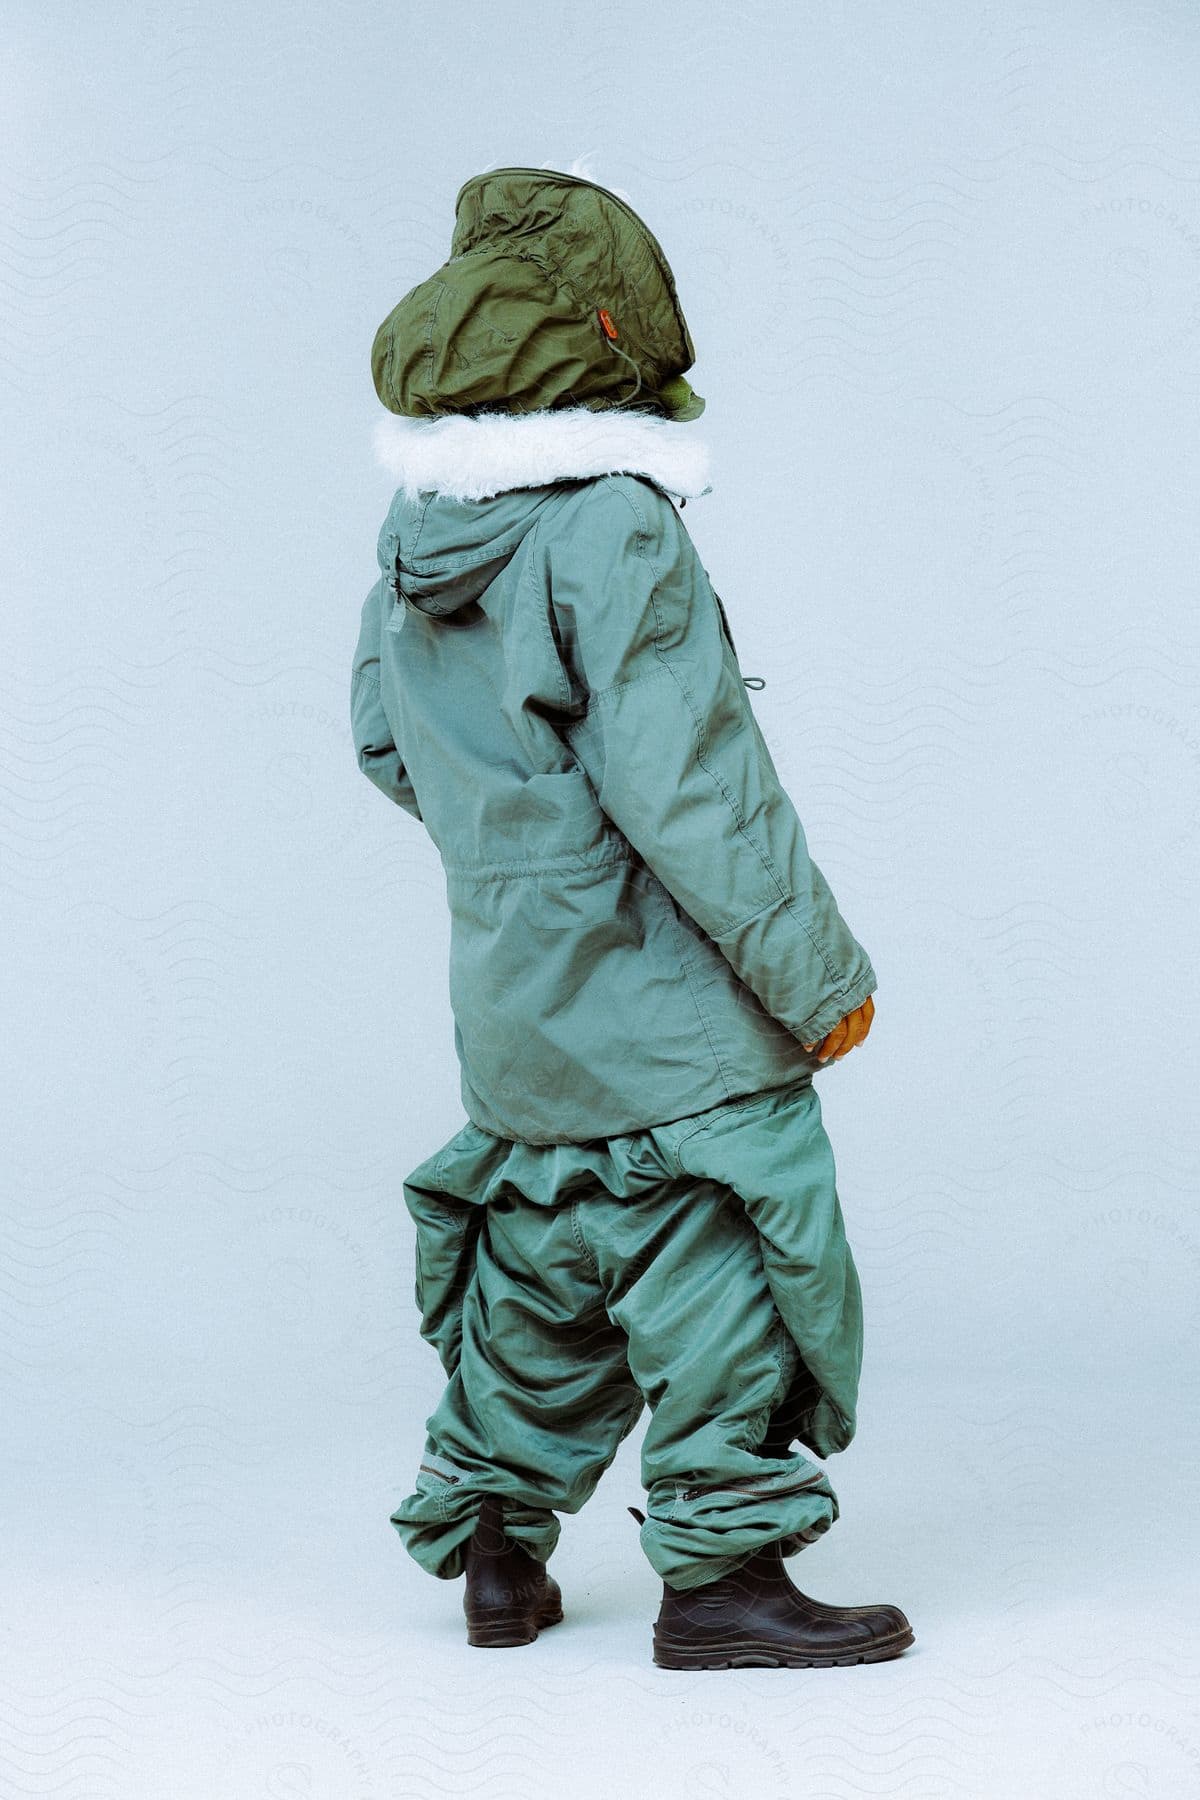 Child wearing a green Cold Weather Hood and a turquoise parka pants and a pair of black boots standing